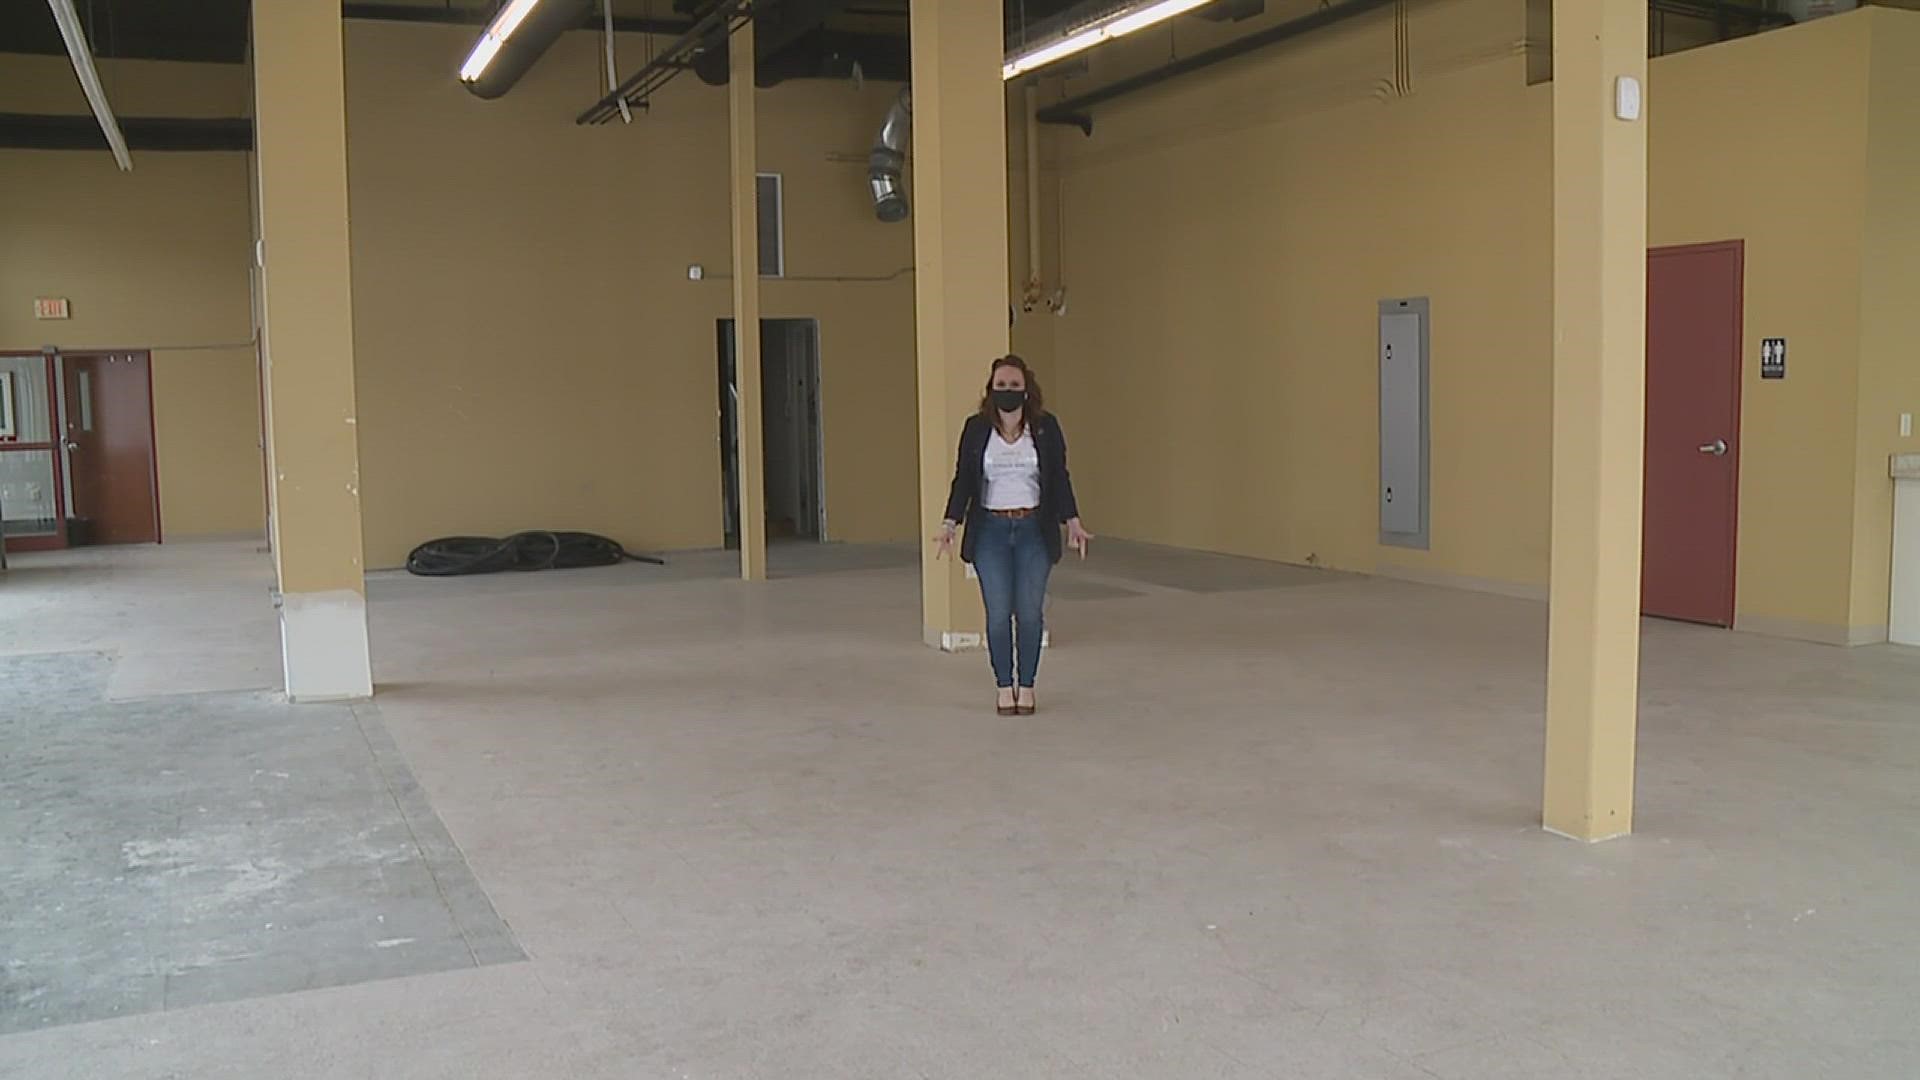 Organizers hope its the first step in rebuilding the city's child care infrastructure, as well as reimagining downtown Moline. The center is set to open in August.